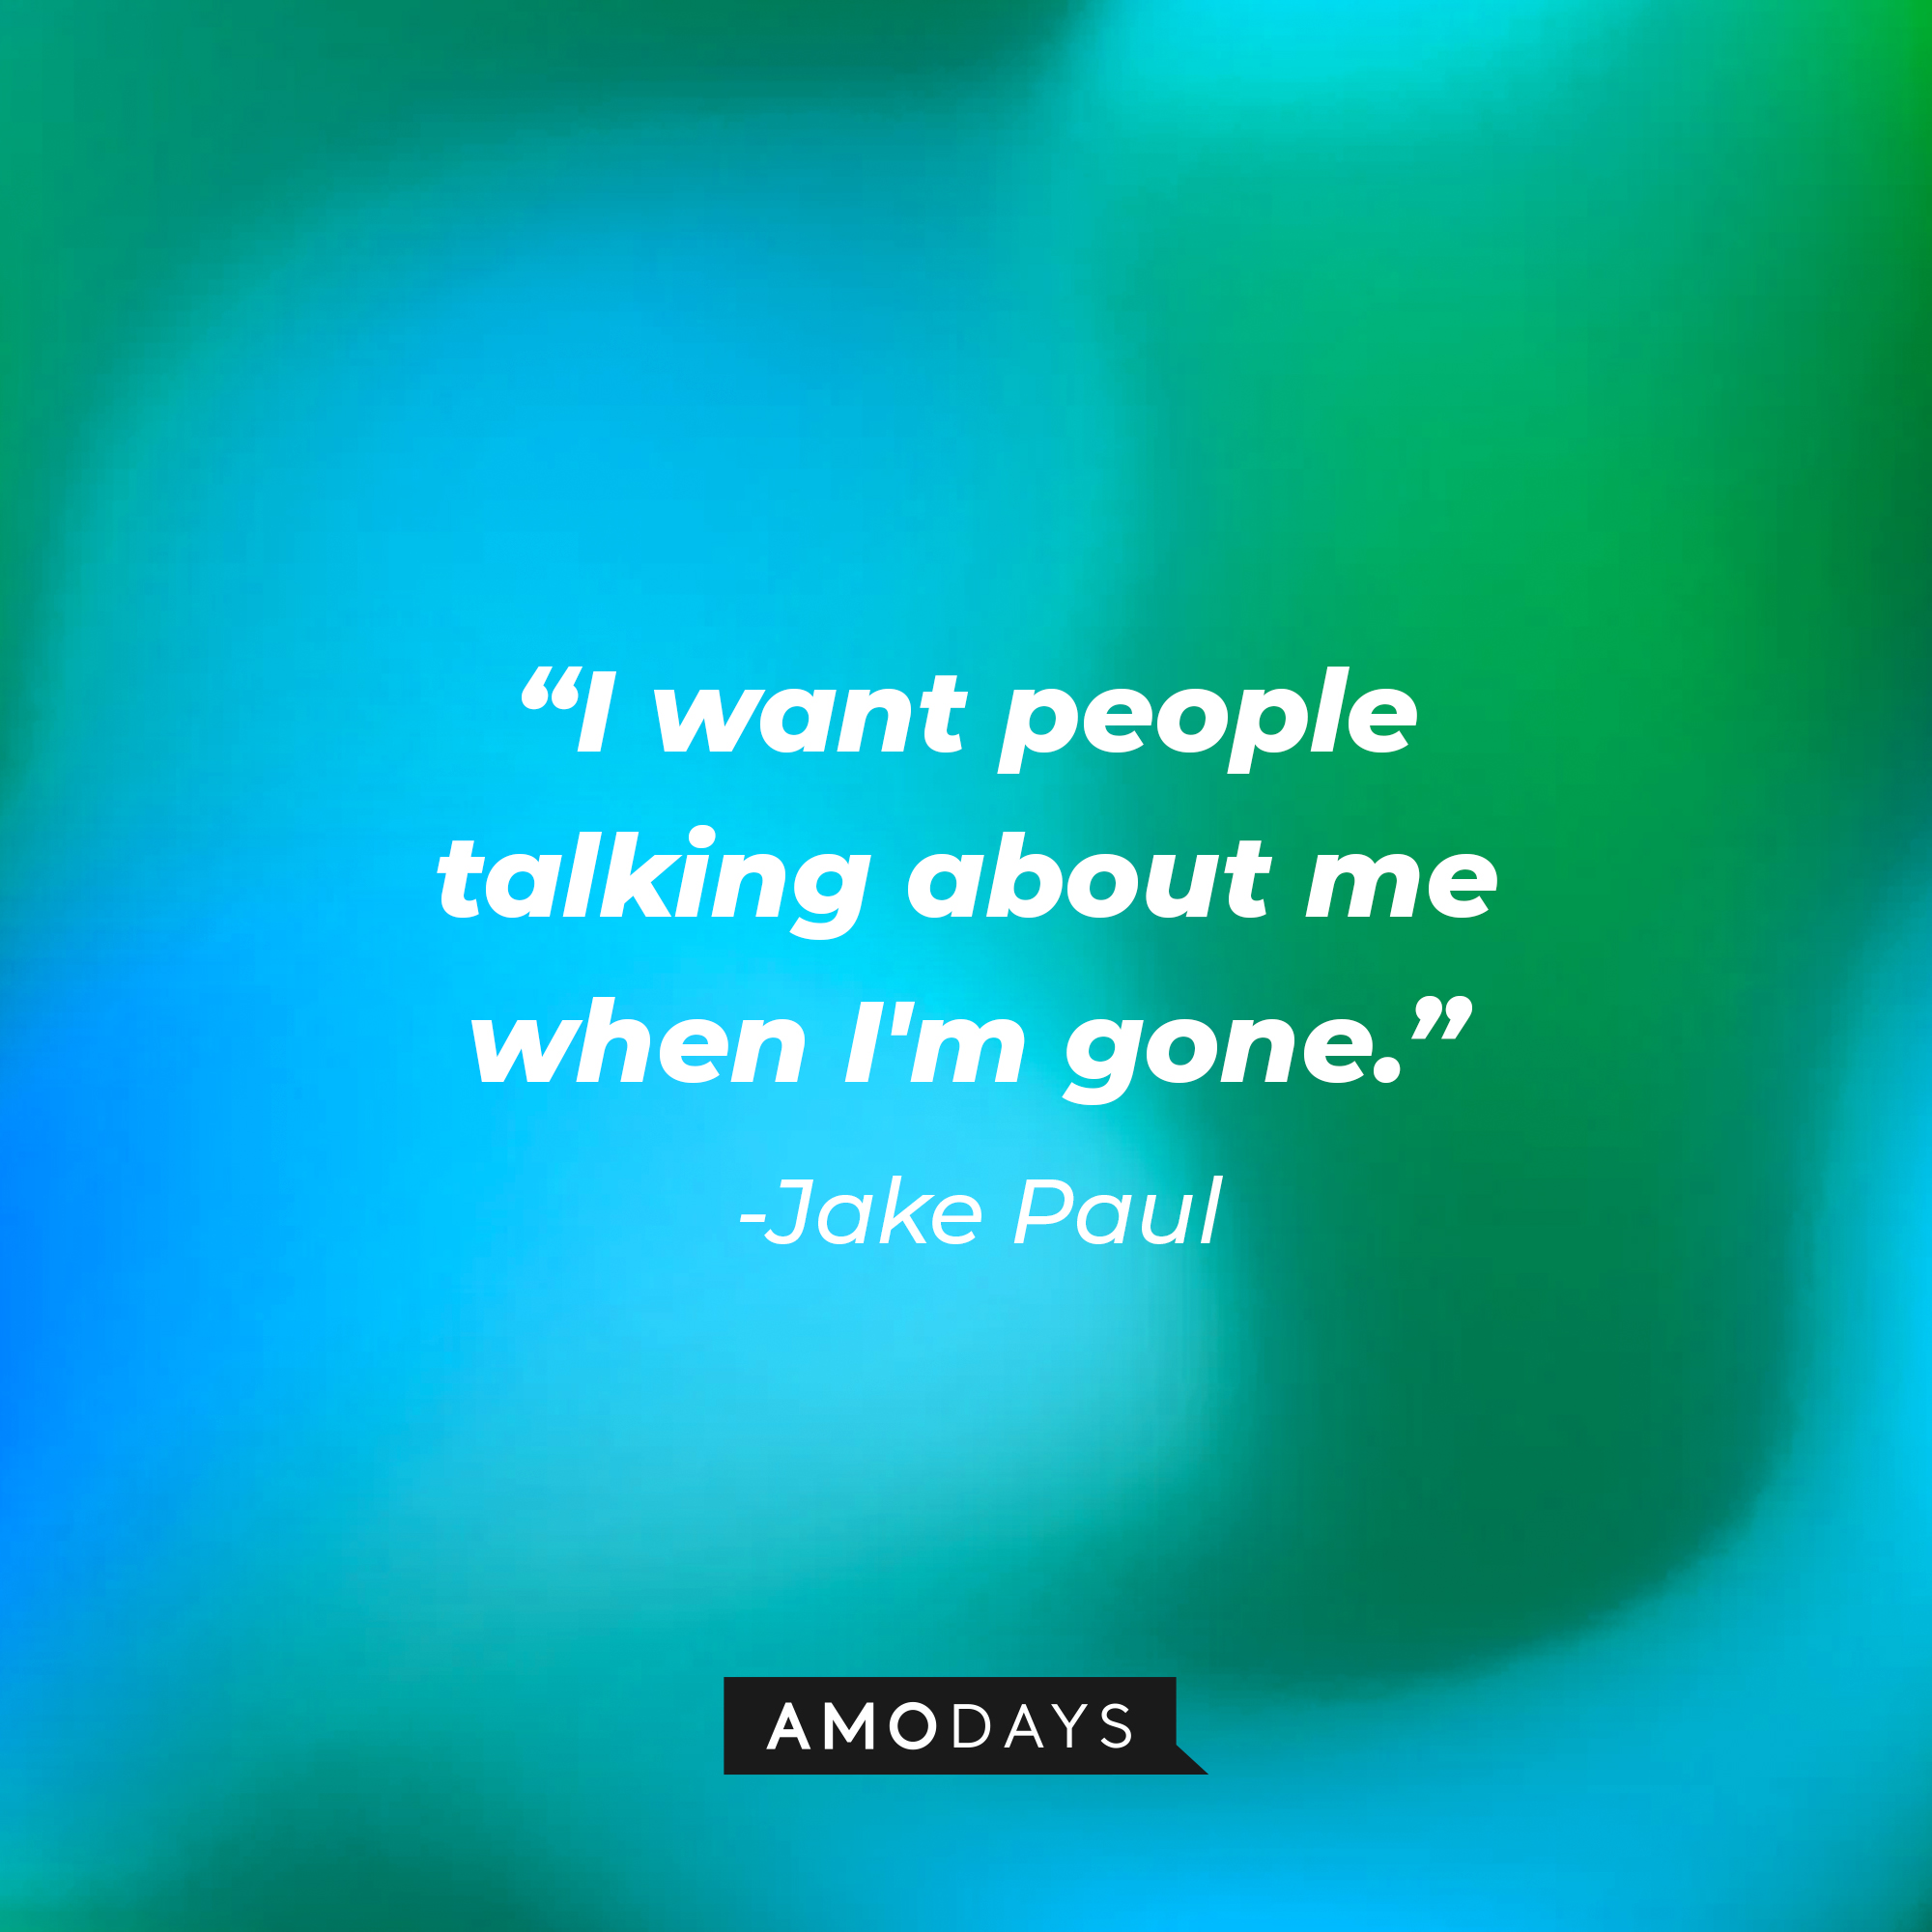 Jake Paul’s quote: "I want people talking about me when I'm gone." | Image: Amodays